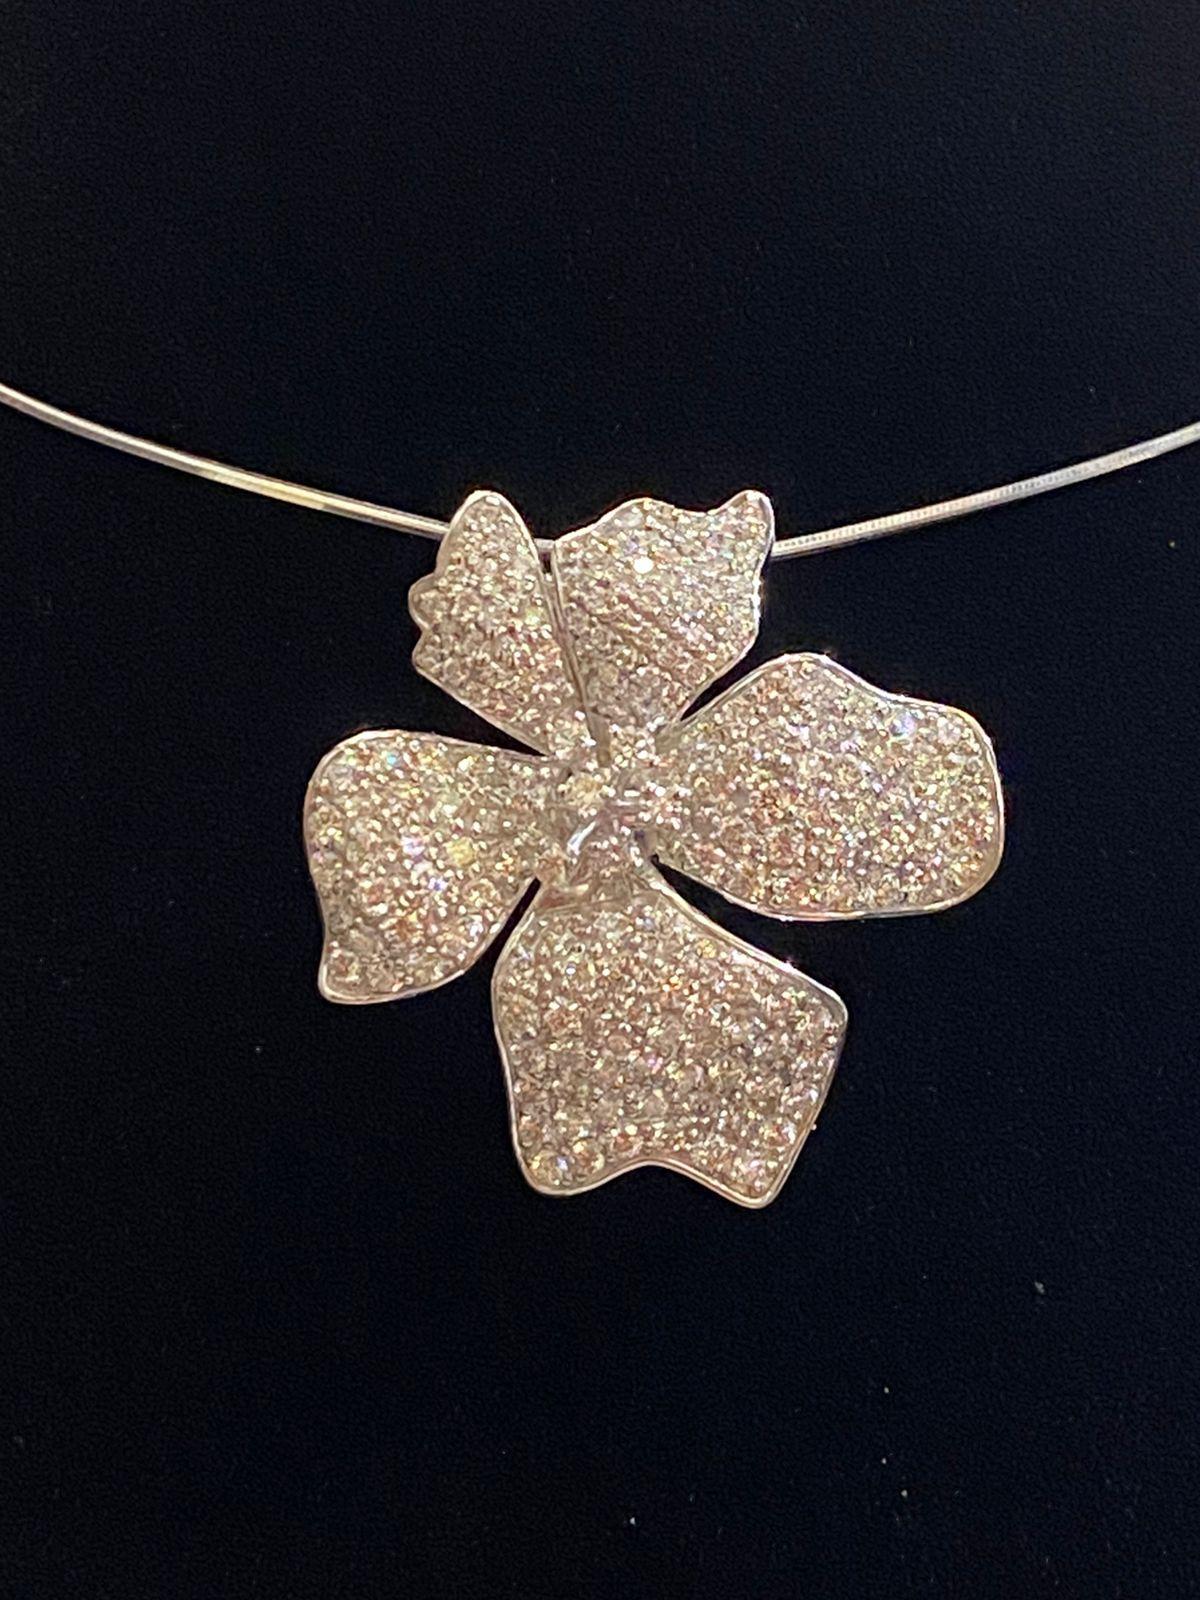 From flowers collection, stunning pendant  in 14k gold with natural diamonds of 2,70  carats, in F/VS1 clarity, so sparkly.
Handmade by artisan goldsmith.
Excellent manufacture.

Whosale price .

Note: on my shipment, no taxes.